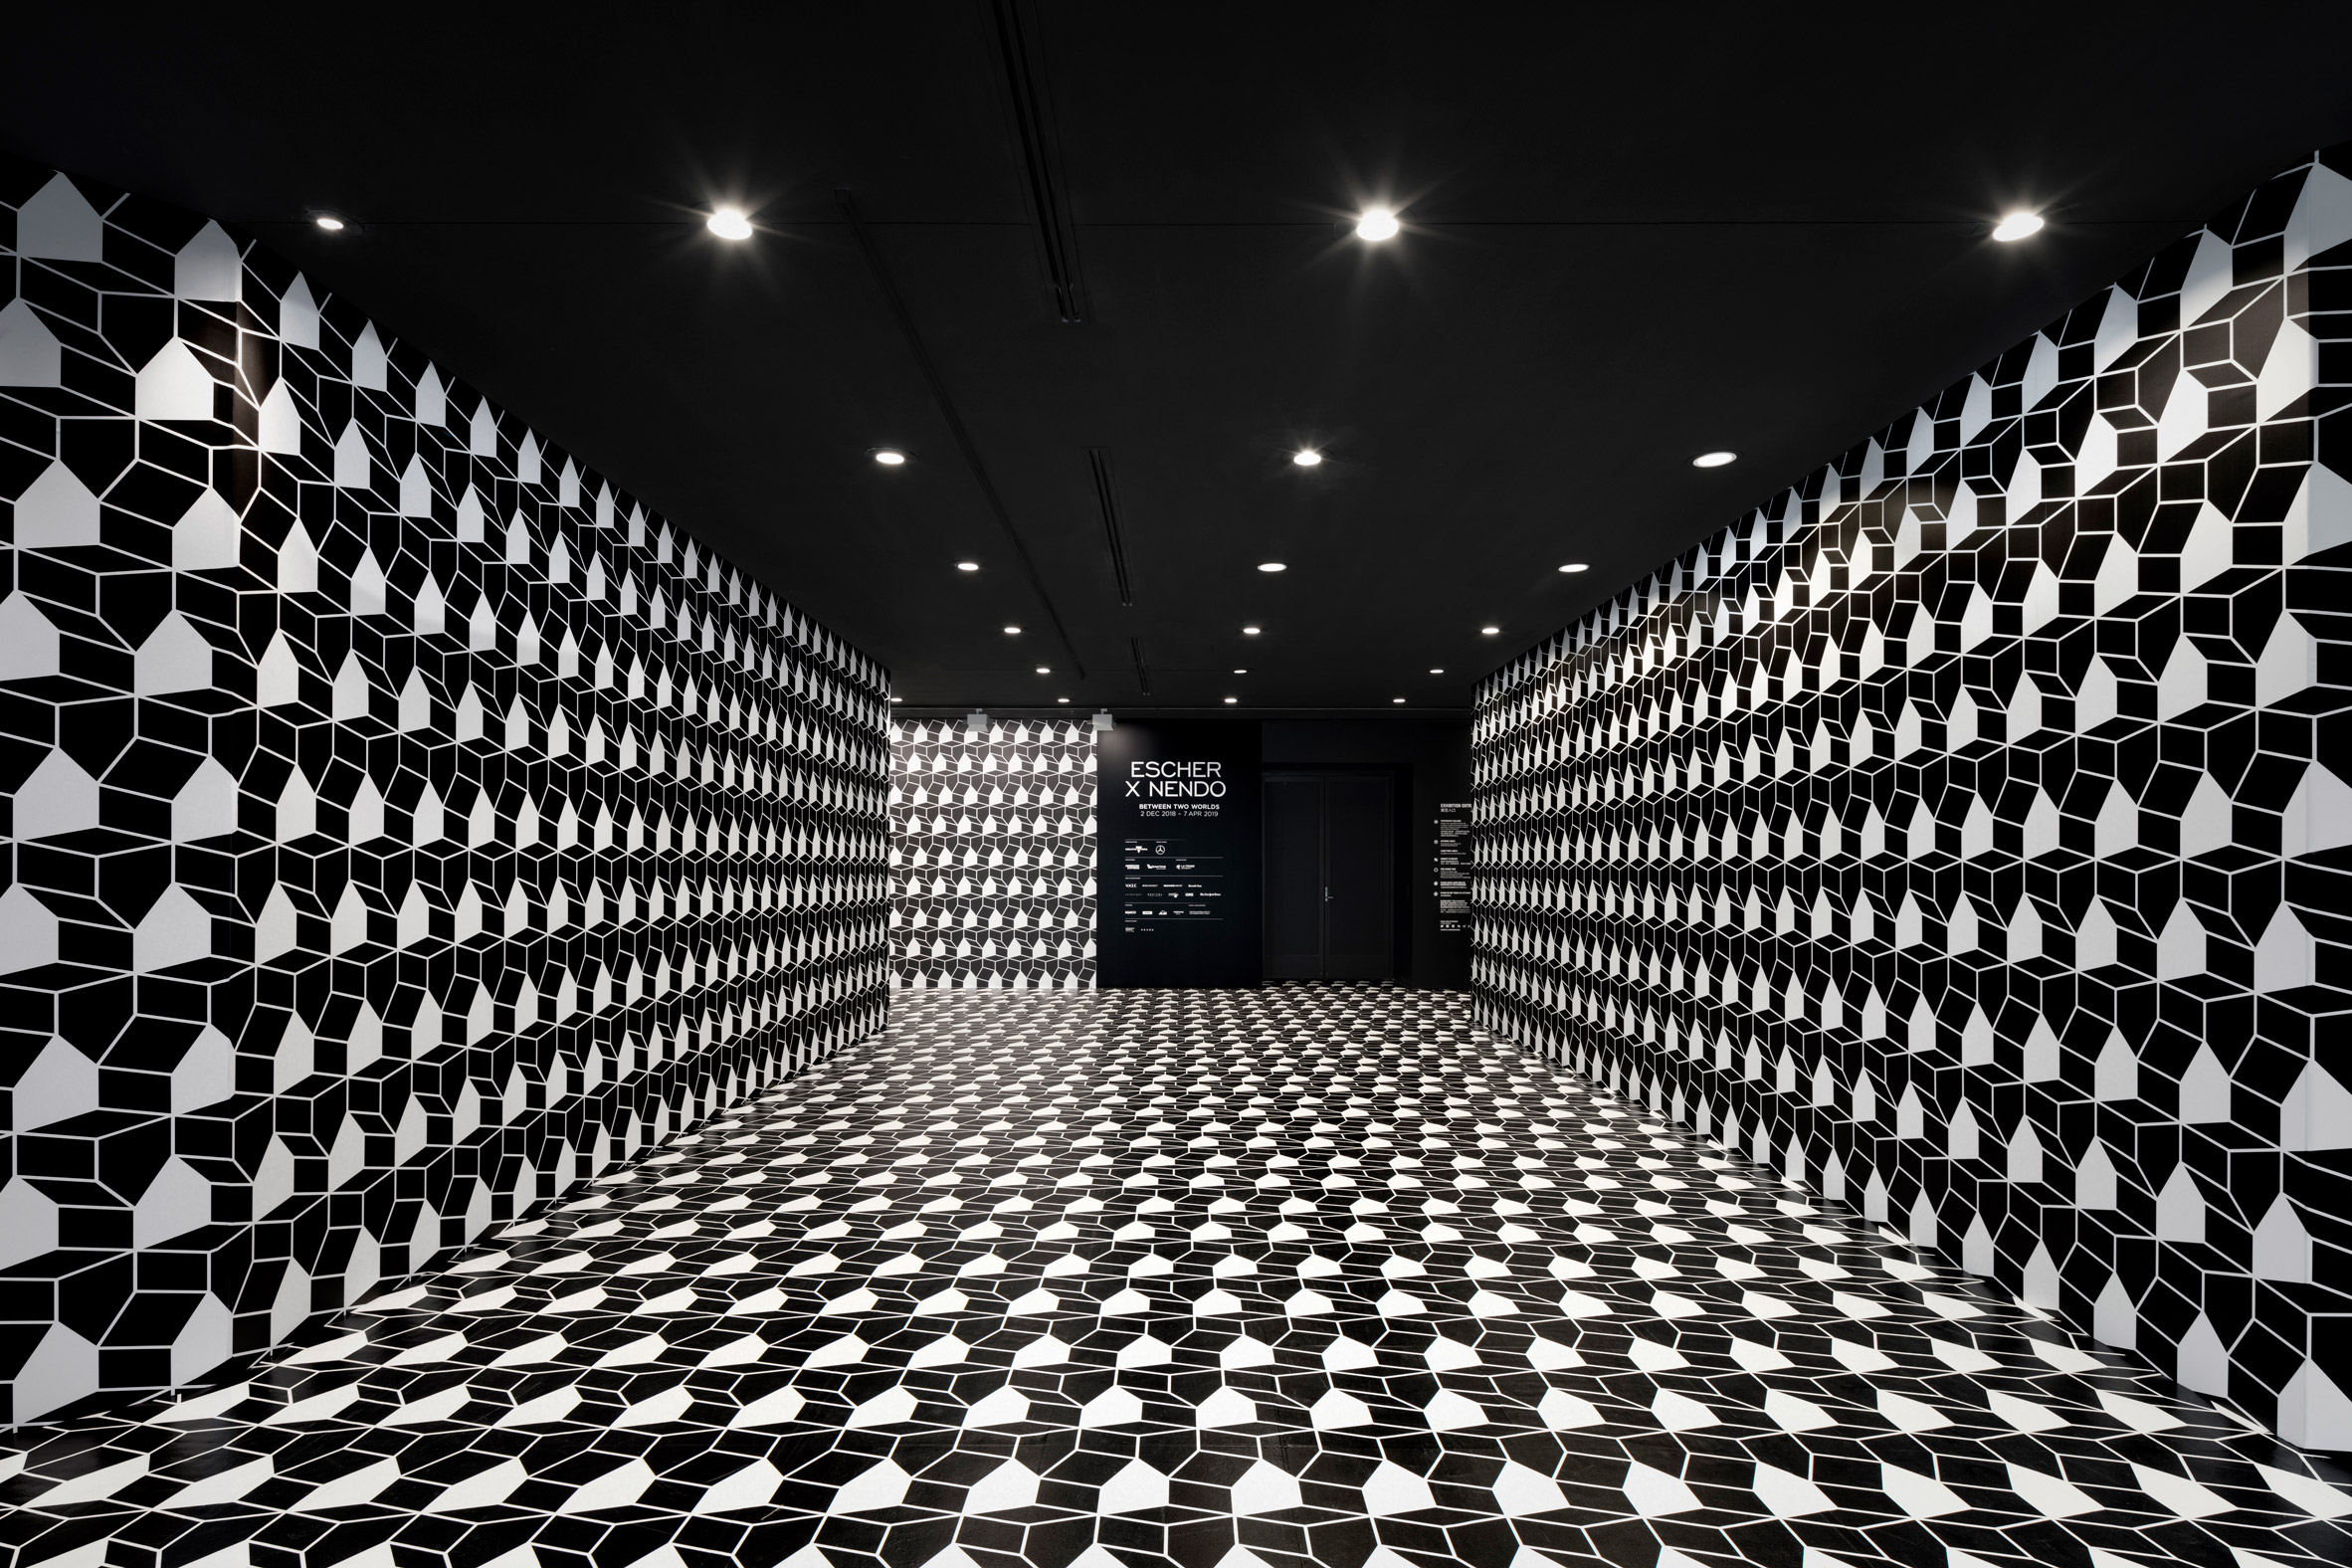 Oki Sato of Nendo has designed an exhibition of M.C. Escher's work at the National Gallery of Victoria in Melbourne.